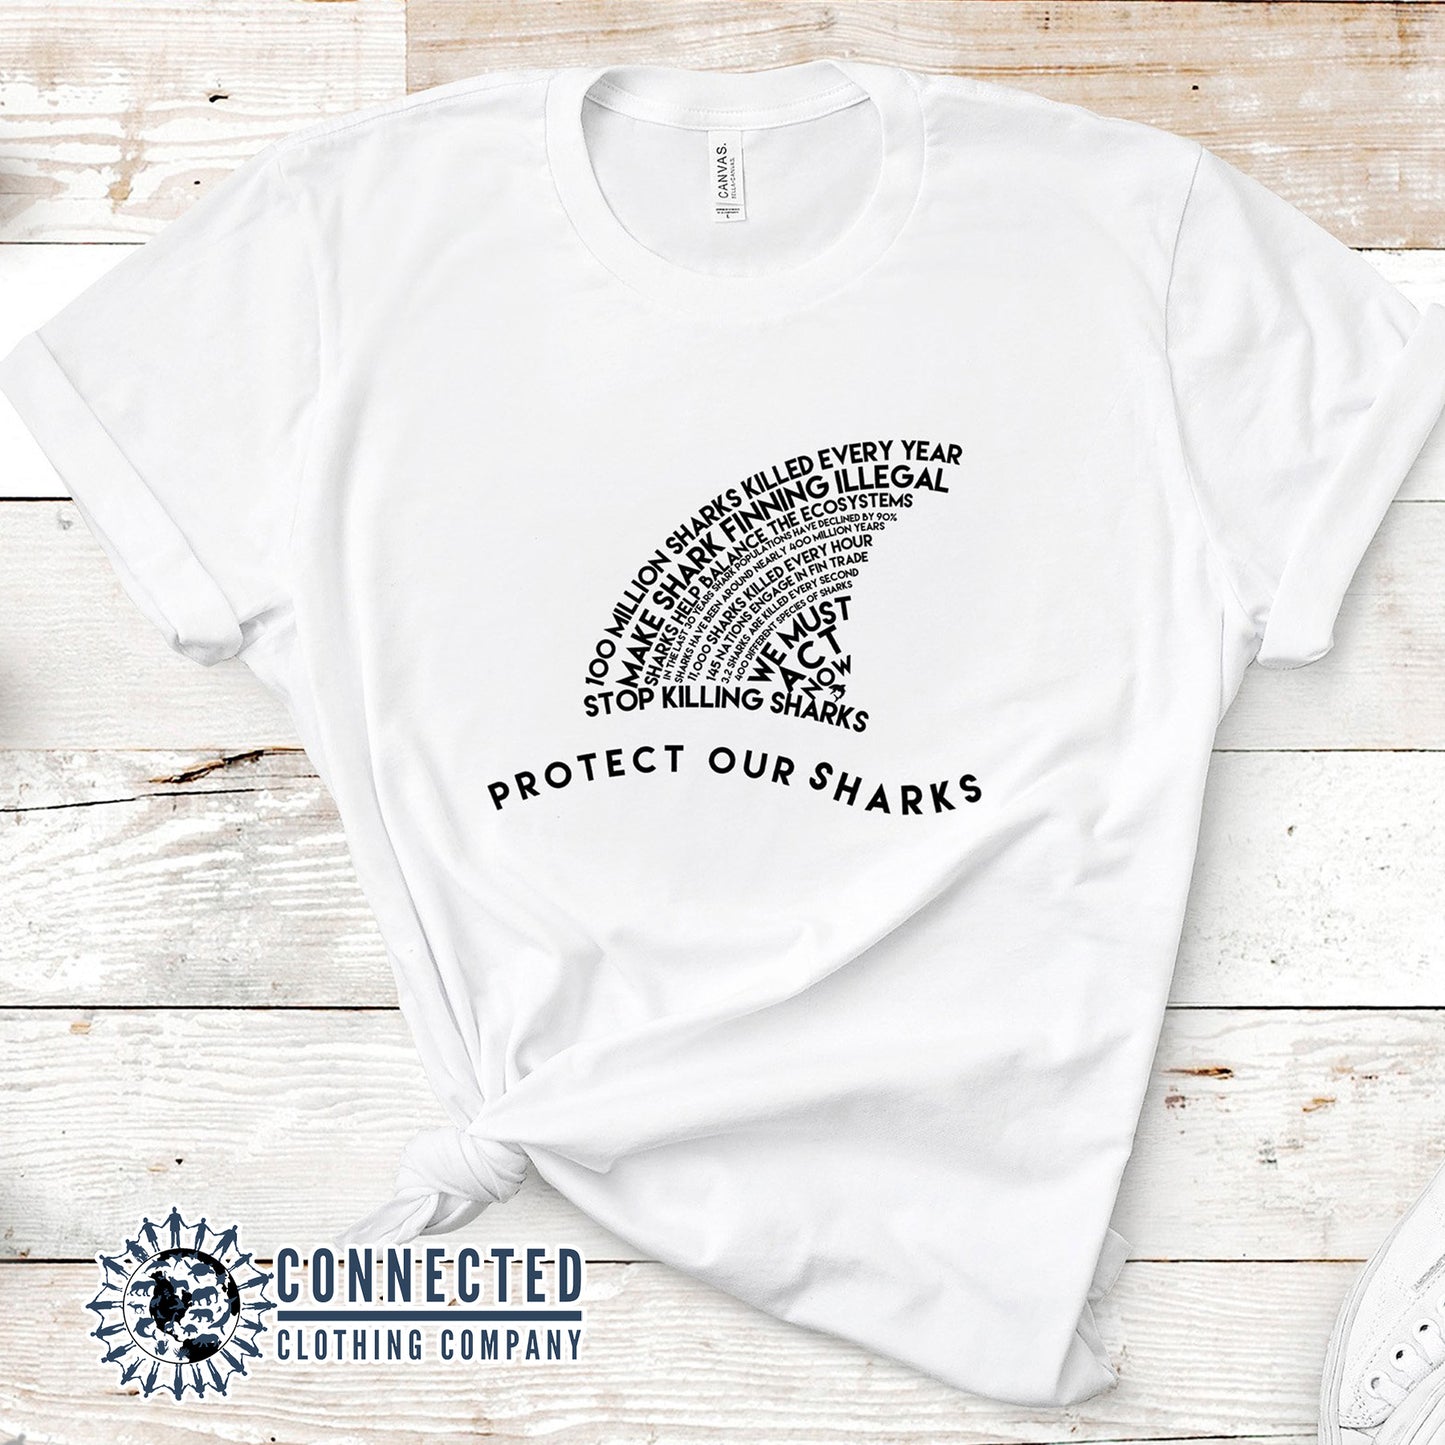 White Protect Our Sharks Short-Sleeve Tee - Connected Clothing Company - Ethically and Sustainably Made - 10% of profits donated to shark conservation and ocean conservation